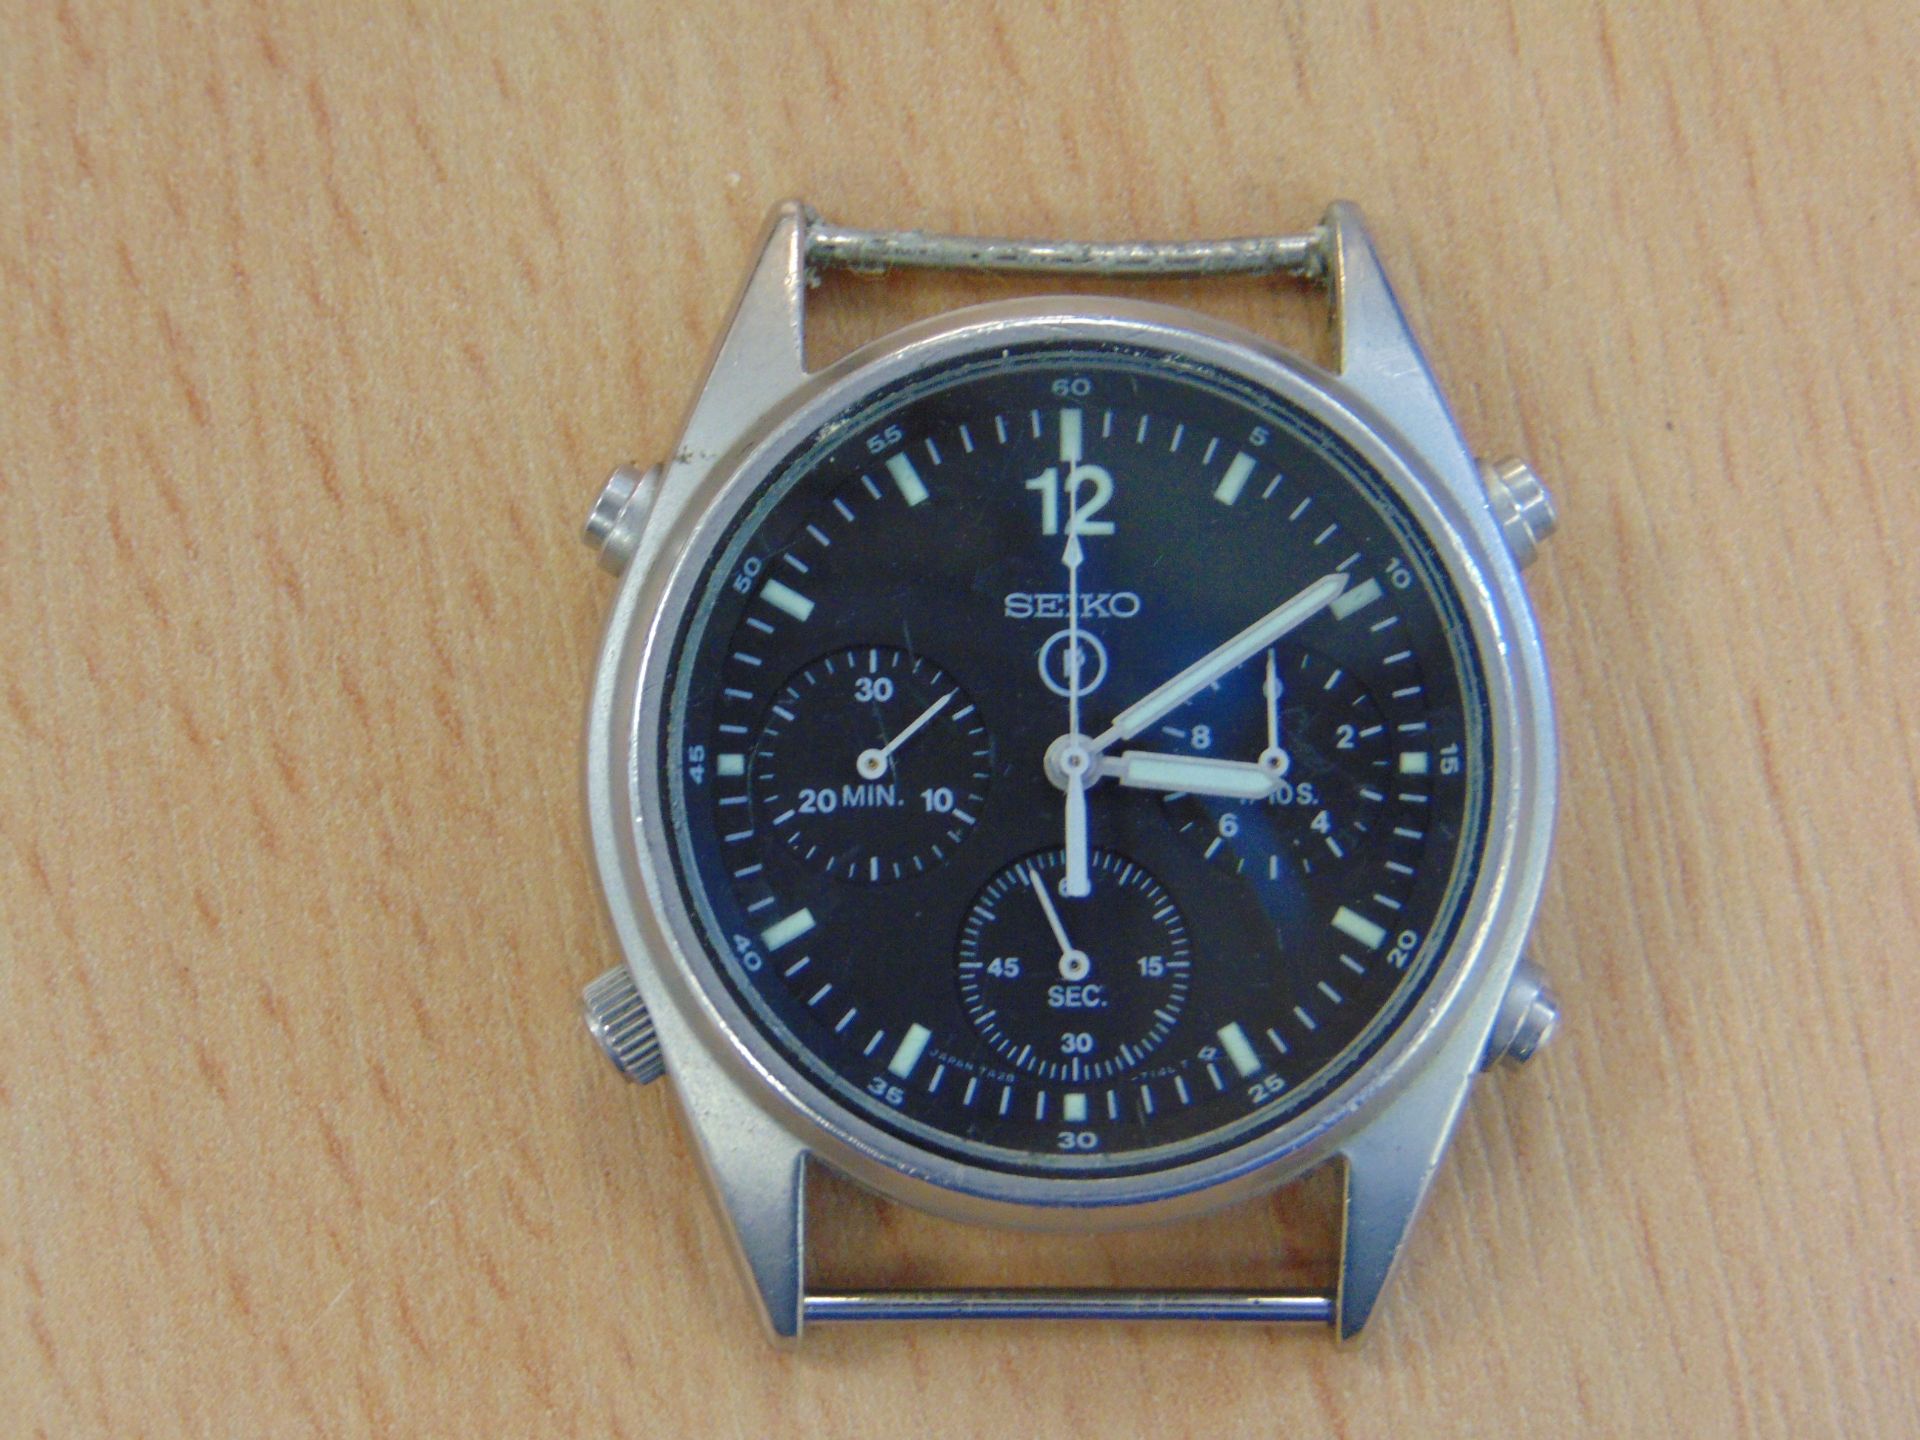 SEIKO GEN 1 PILOTS CHRONO RAF ISSUE WATCH NATO MARKINGS DATED 1989 AS ISSUED TO HARRIER FORCE - Image 3 of 10